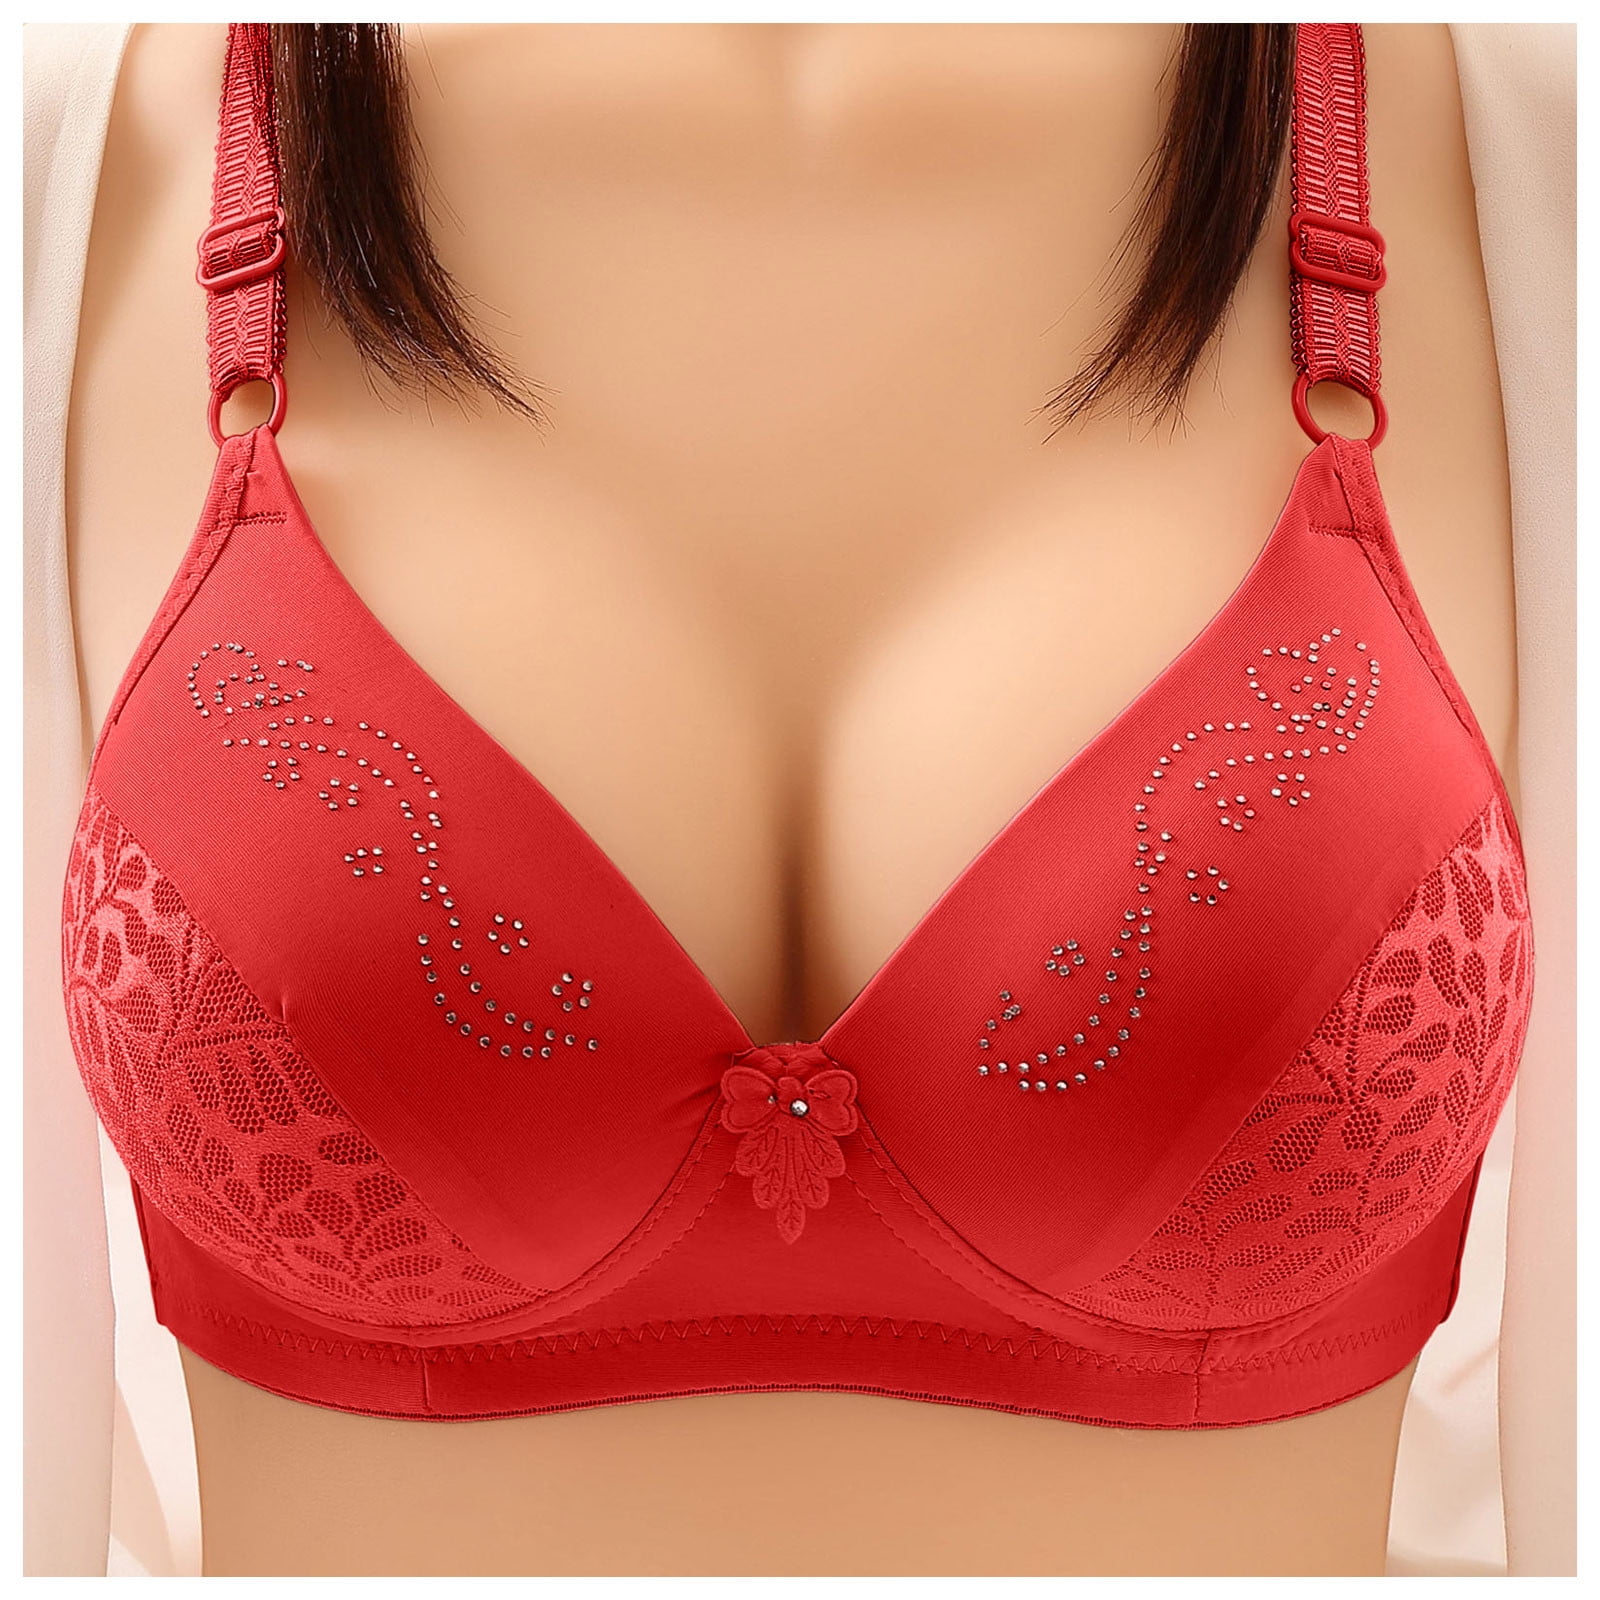 adviicd Push Up Bras for Women Women's No Side Effects Underarm and  Back-Smoothing Comfort Wireless Lift T-Shirt Bra F 40 